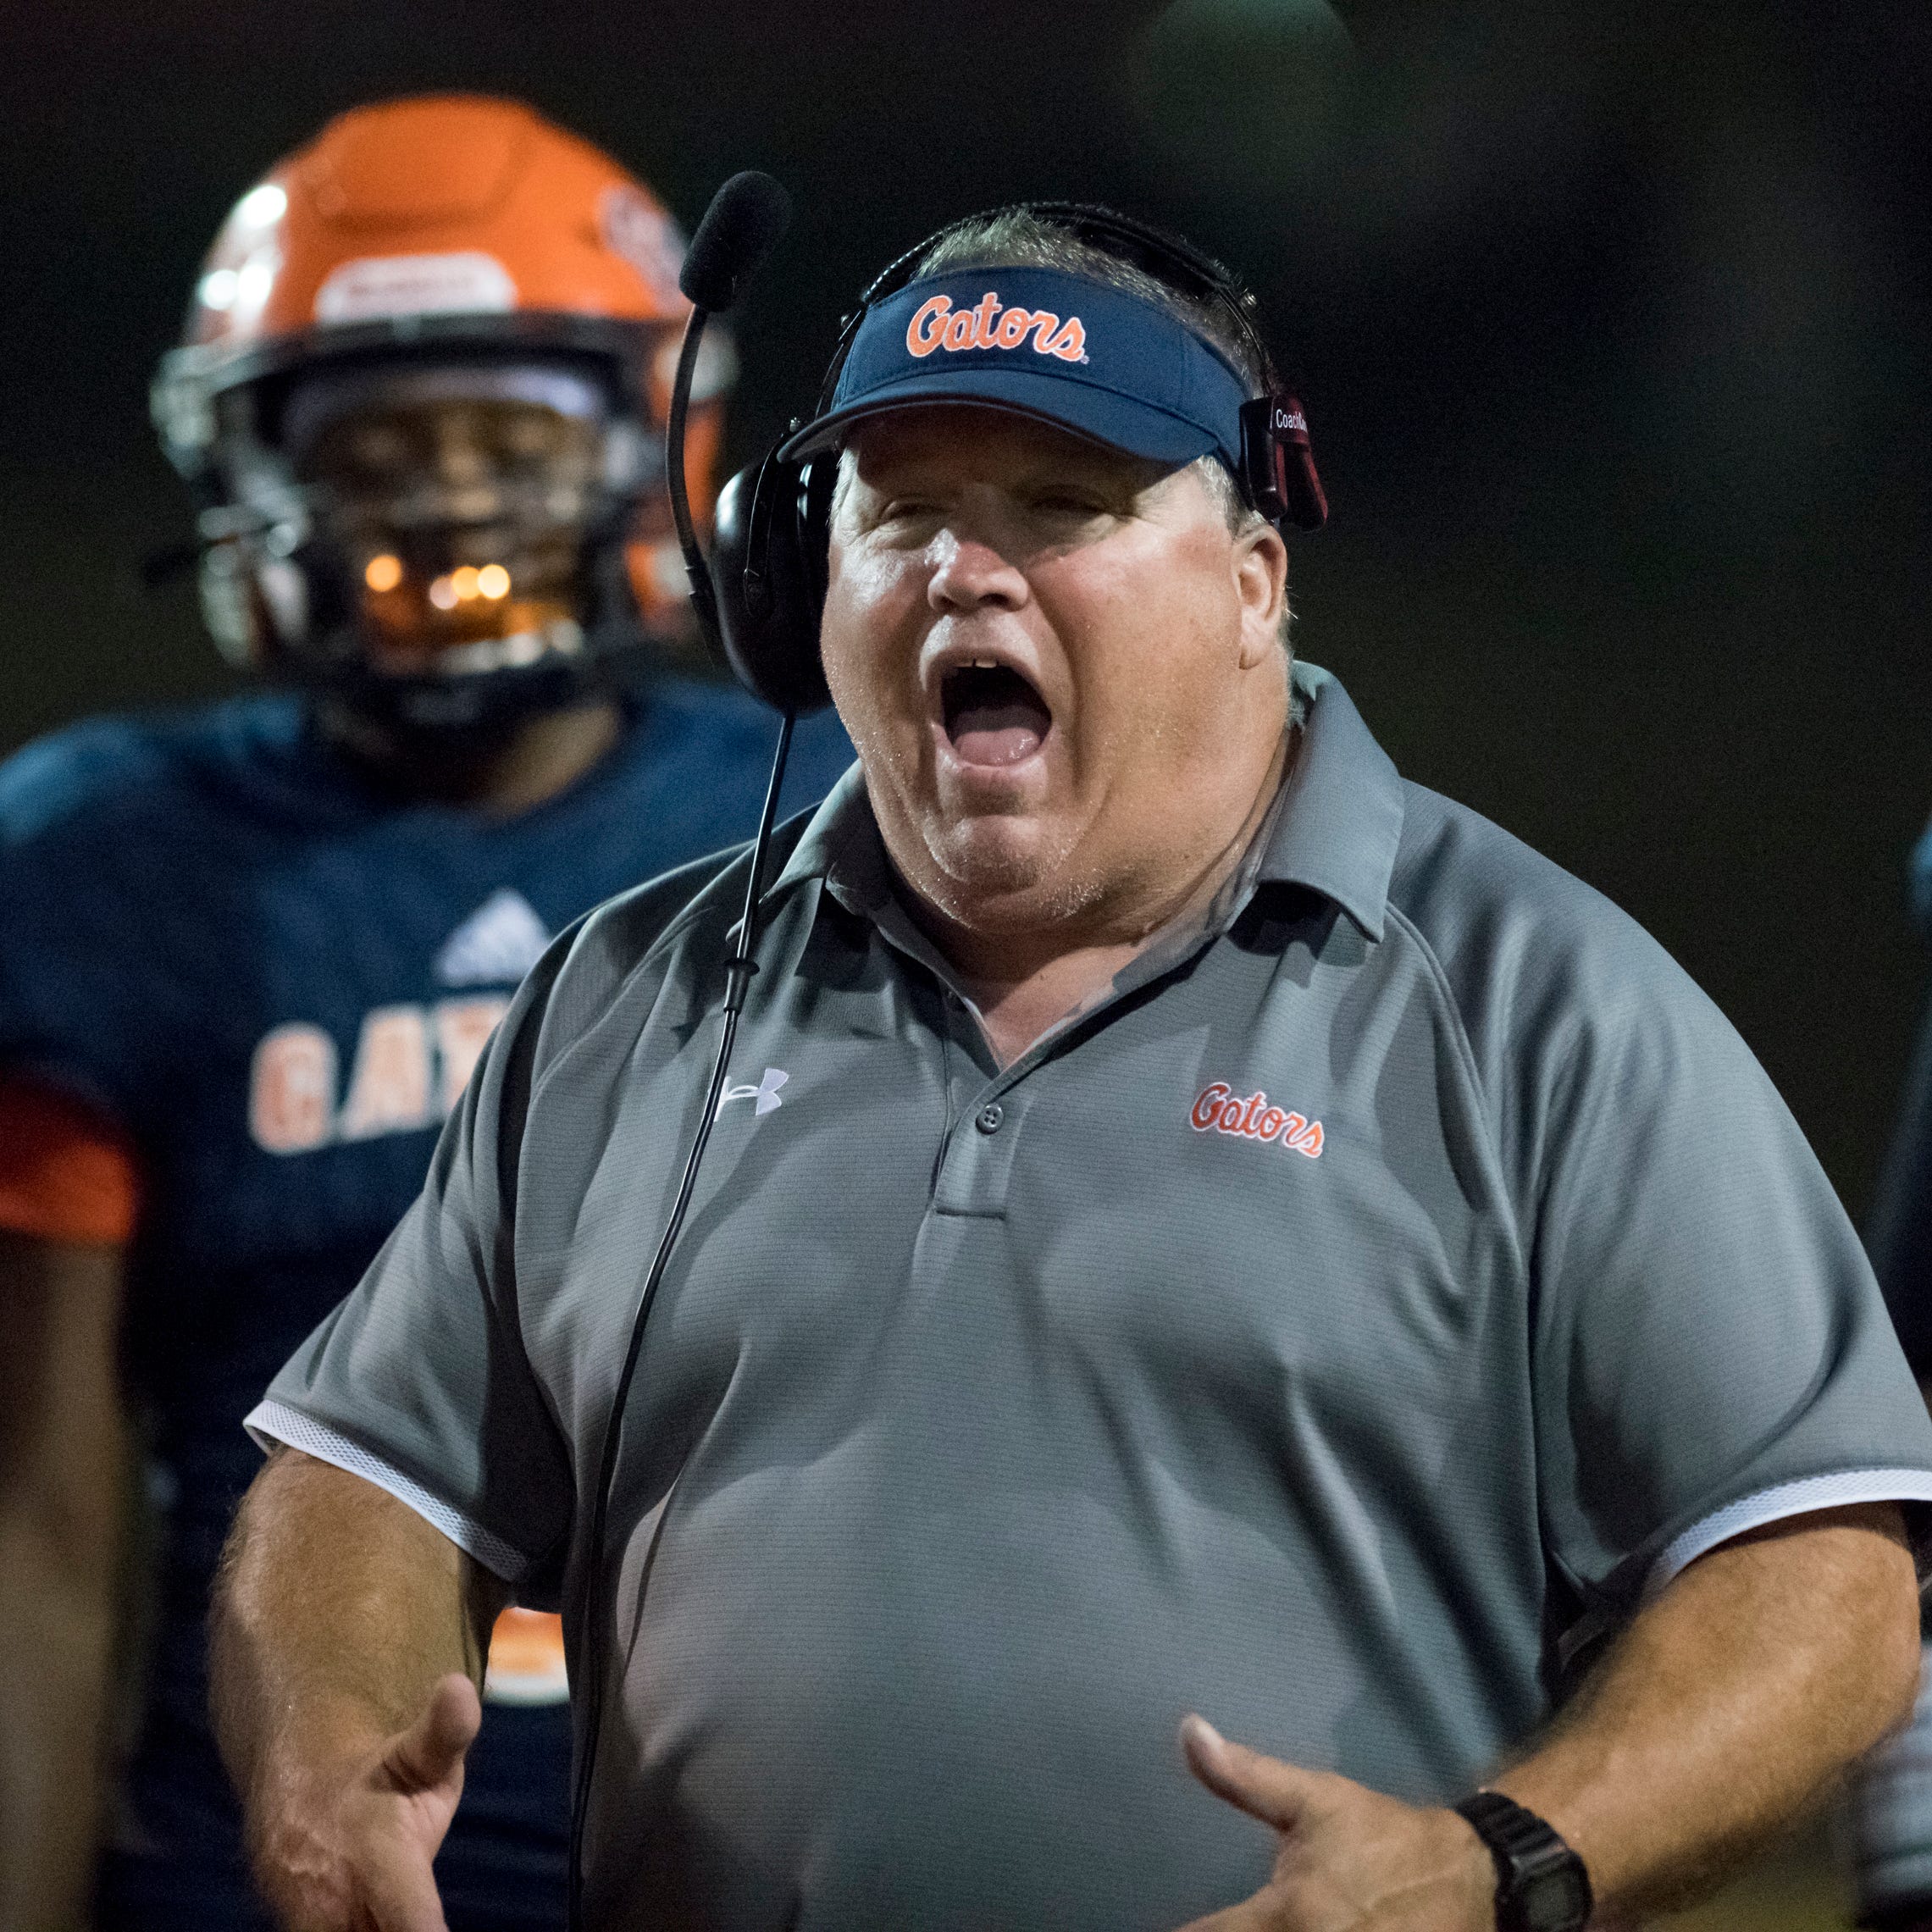 Head coach Mike Bennett communicates with his team during the Booker T. Washington vs. Escambia football game at Escambia High School in Pensacola on Friday, Oct. 25, 2019.